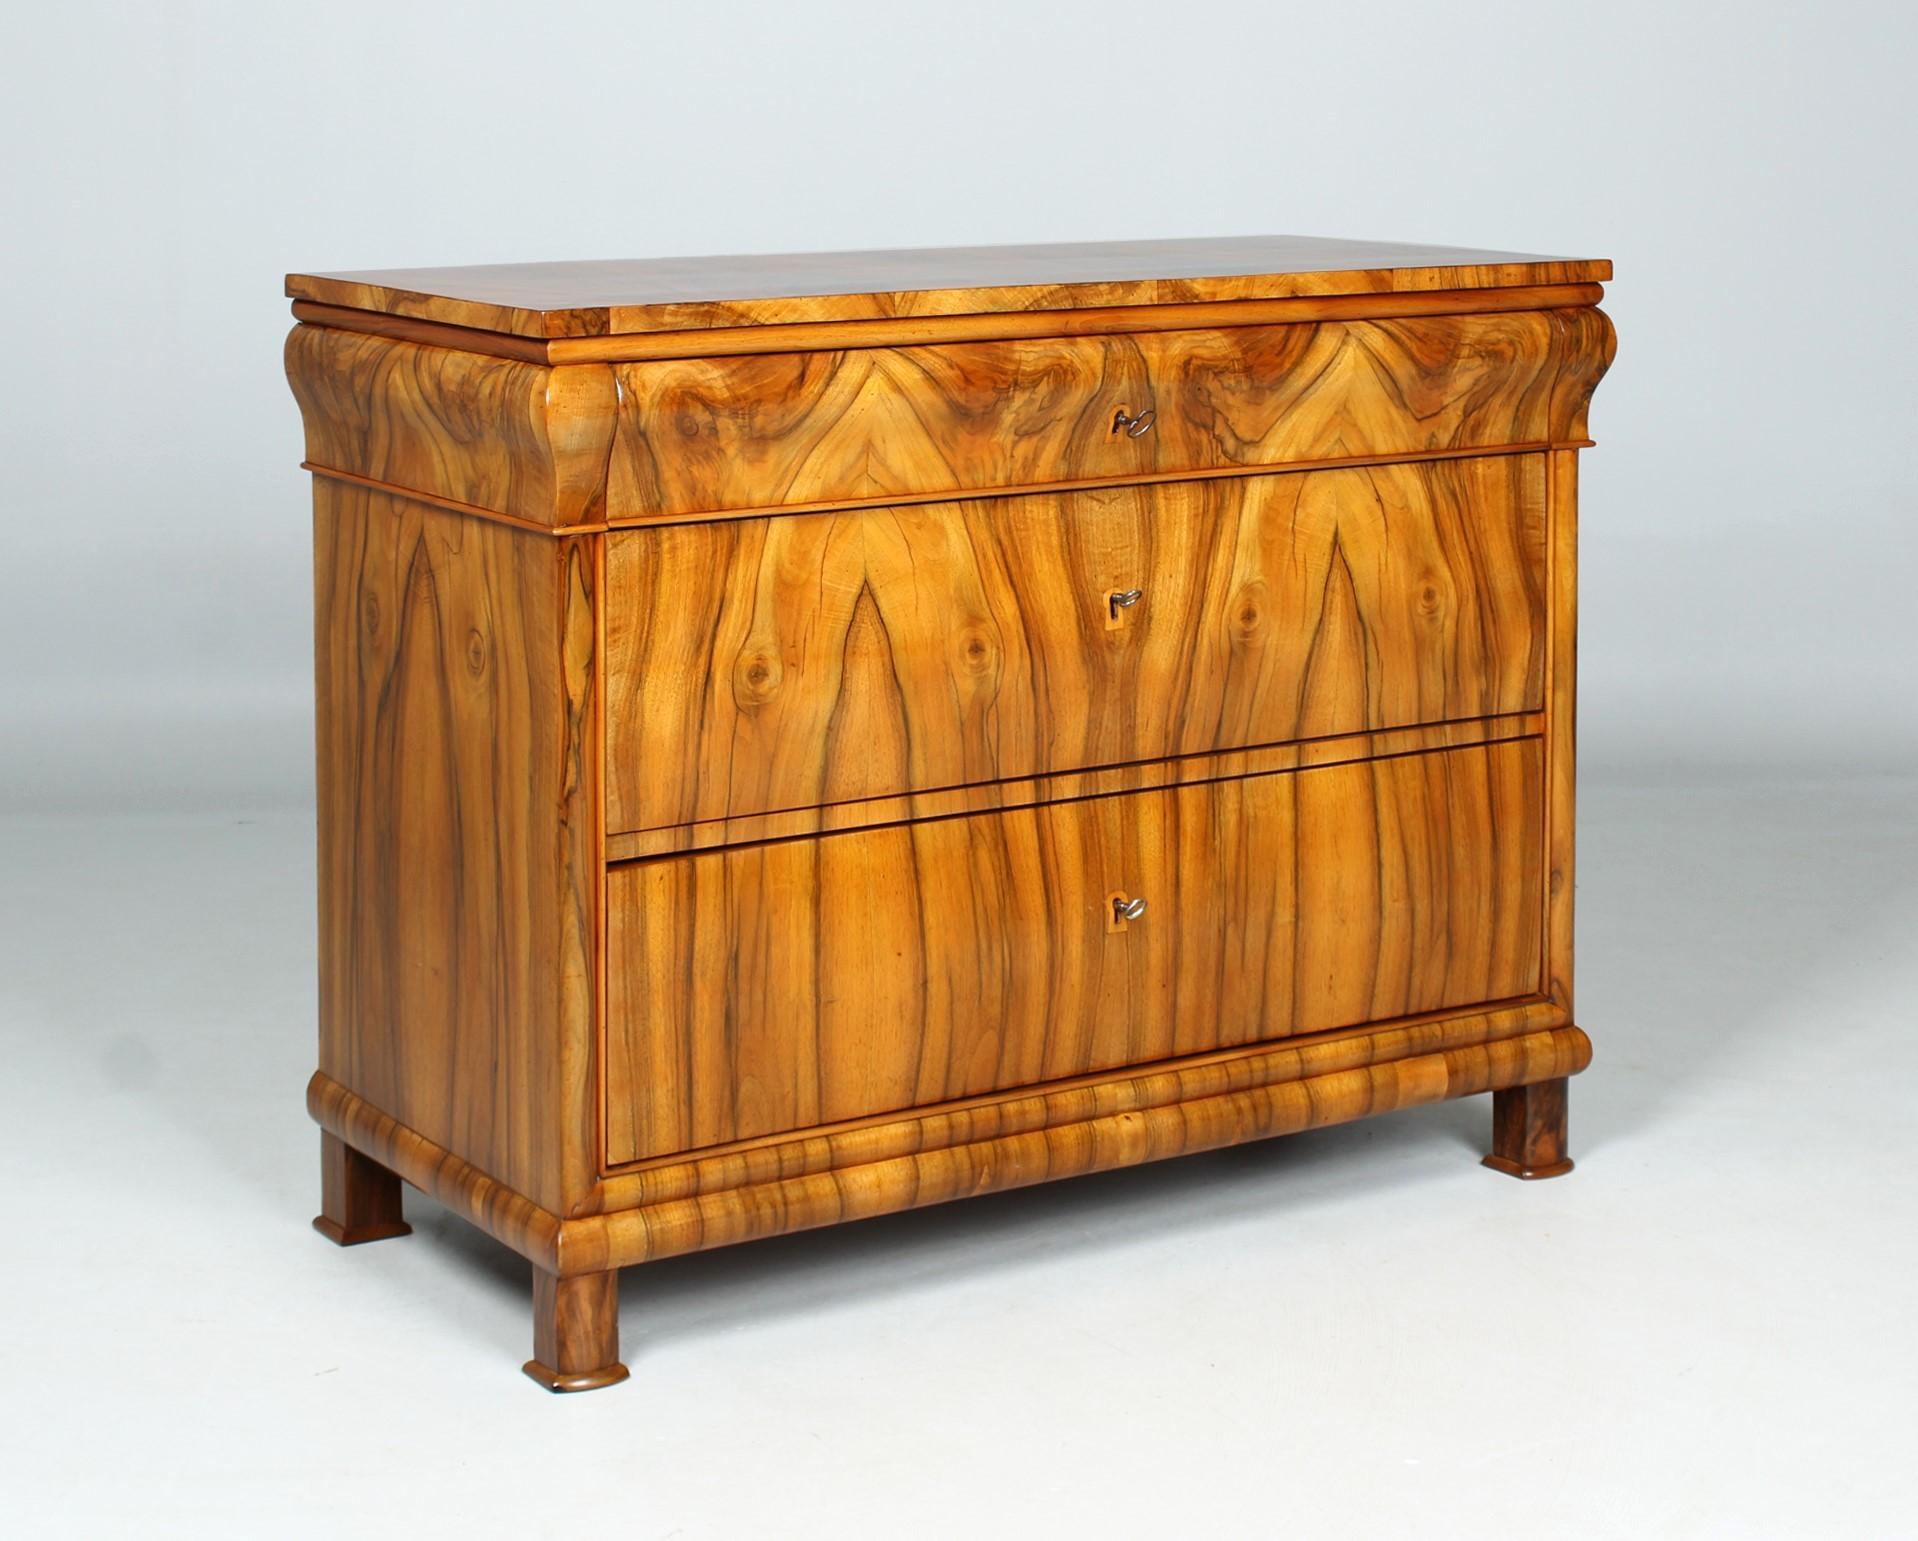 19th Century Biedermeier Chest Of Drawers

South-West-Germany
Walnut
Biedermeier around 1835

Dimensions: H x W x D: 92 x 114 x 54 cm

Description:
Three-tier piece of furniture standing on square feet.

Two things are immediately noticeable about